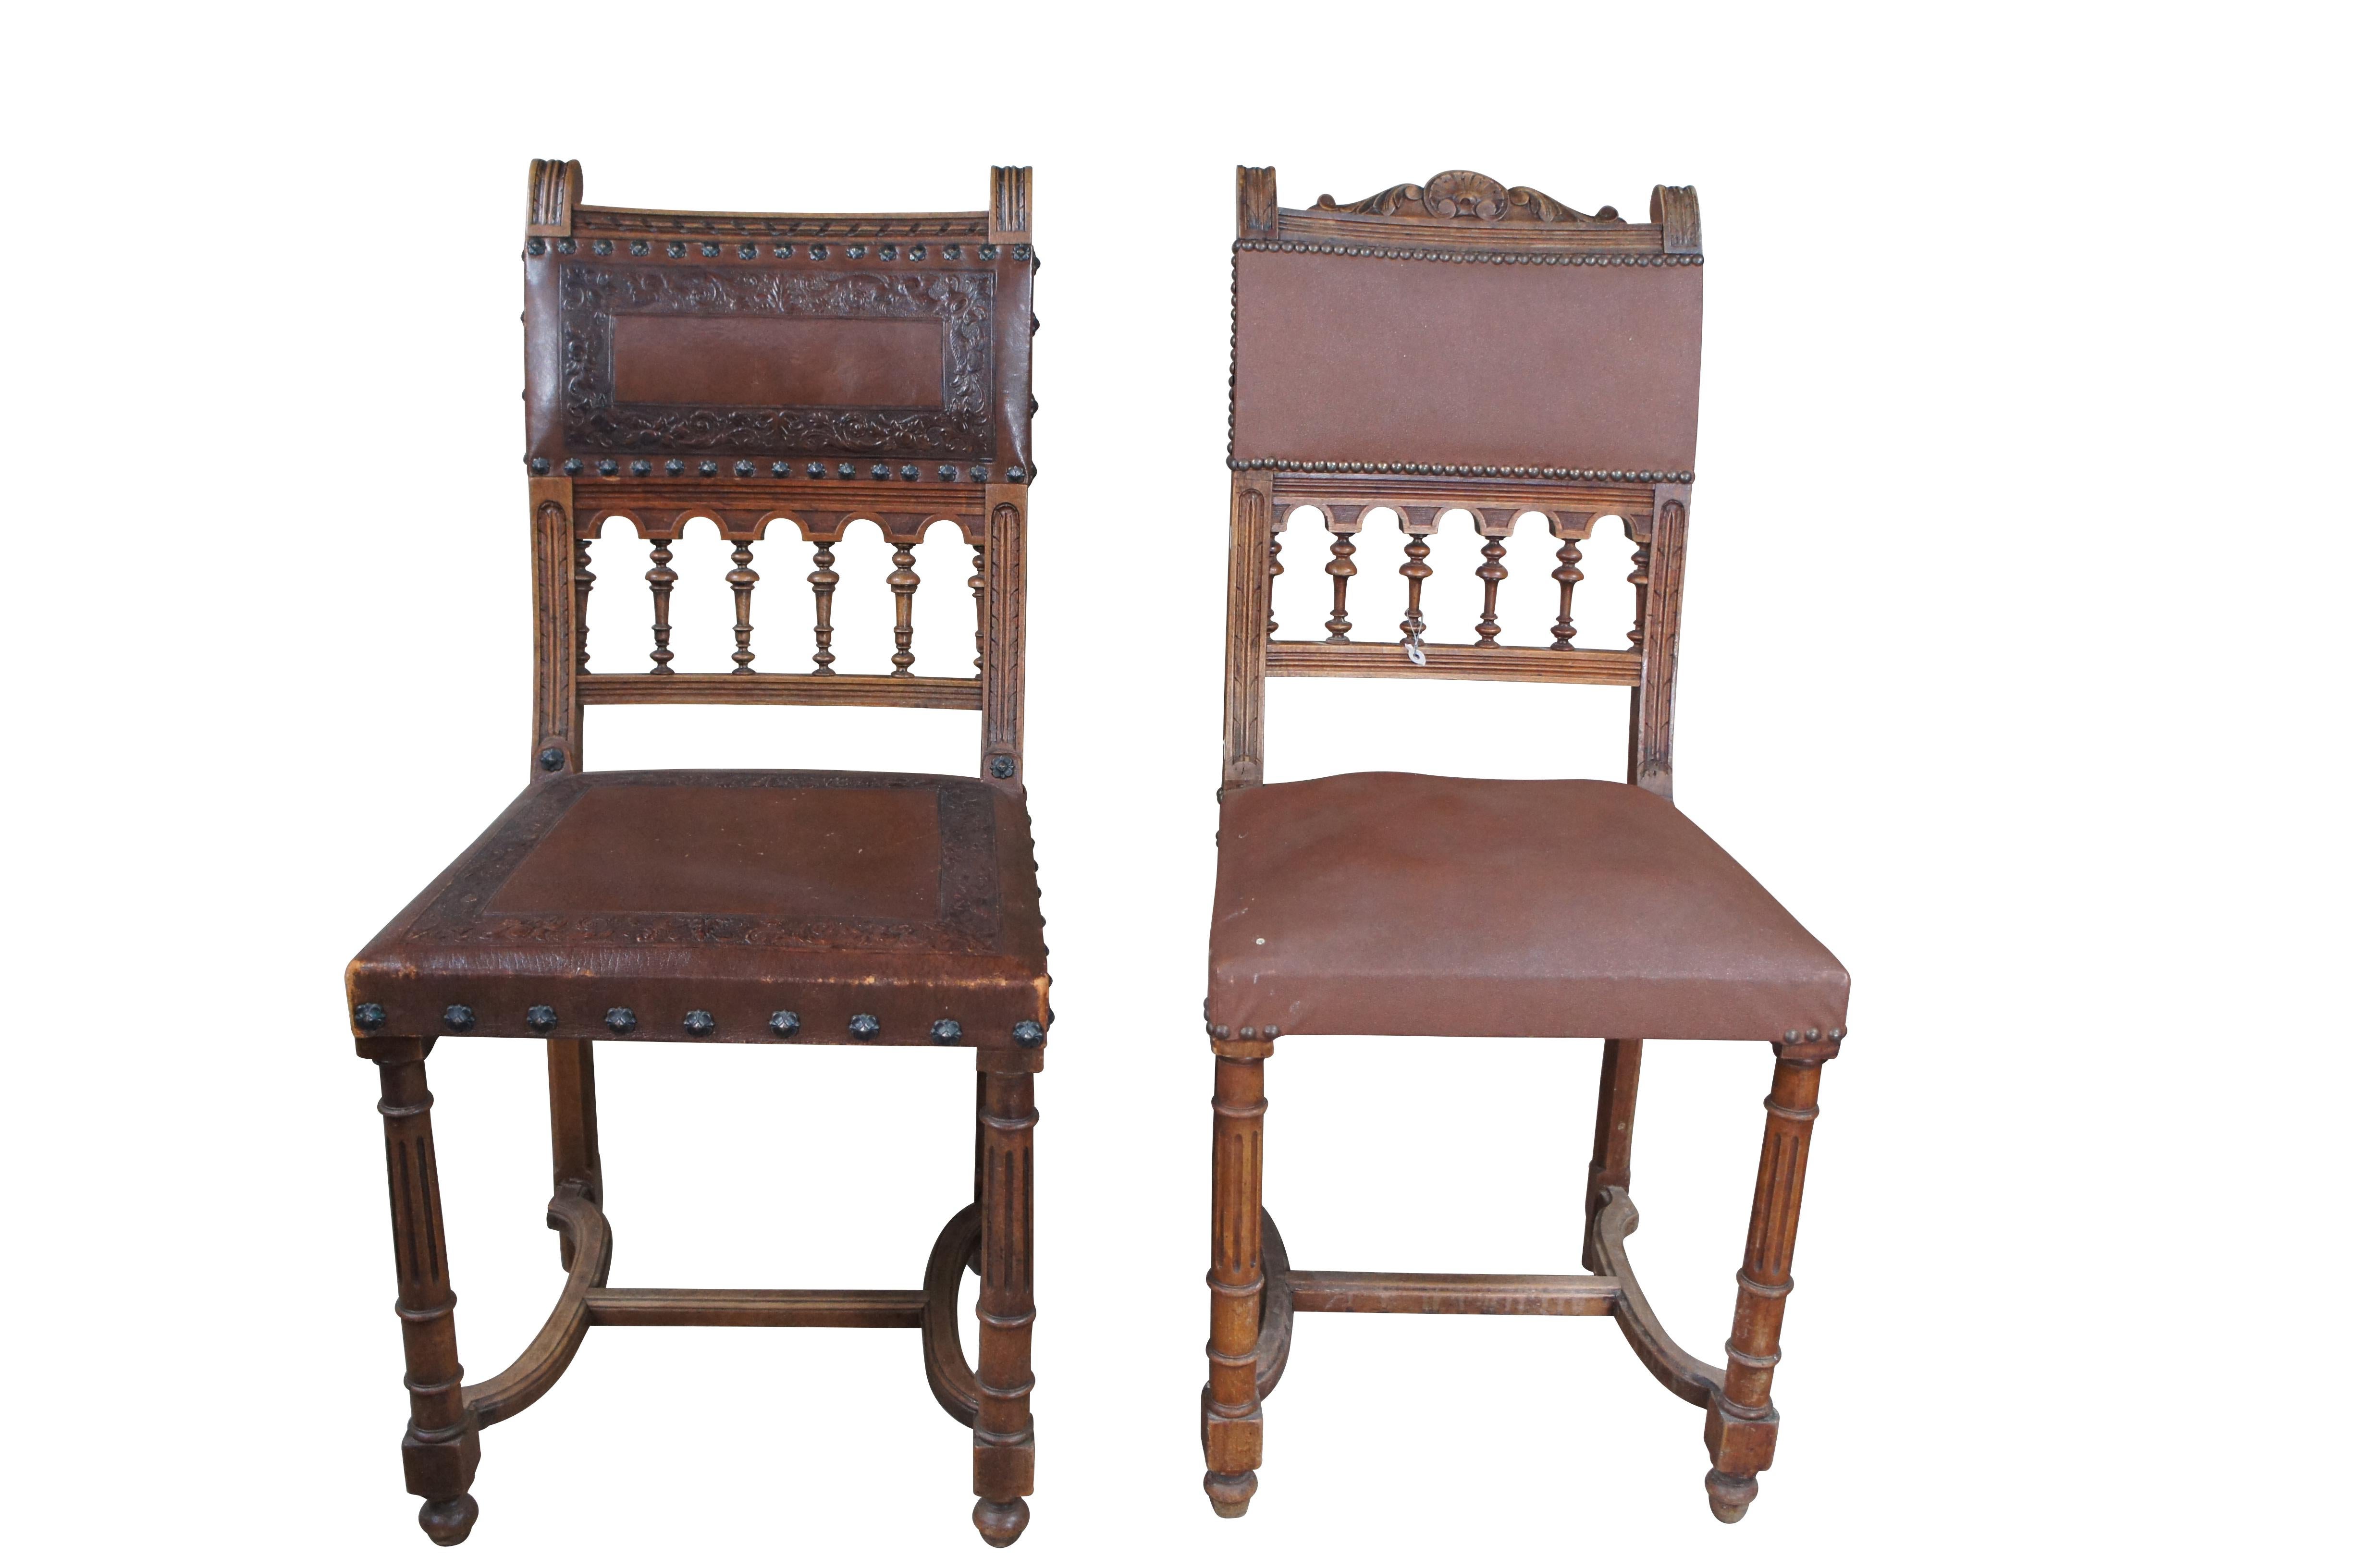 Lot of four Henry II style dining chairs. Features a hardwood construction with carved and molded spindle backs. The chairs are supported by fluted legs with H stretchers and bun feet. Upholstered in leather with some tooling and nailhead